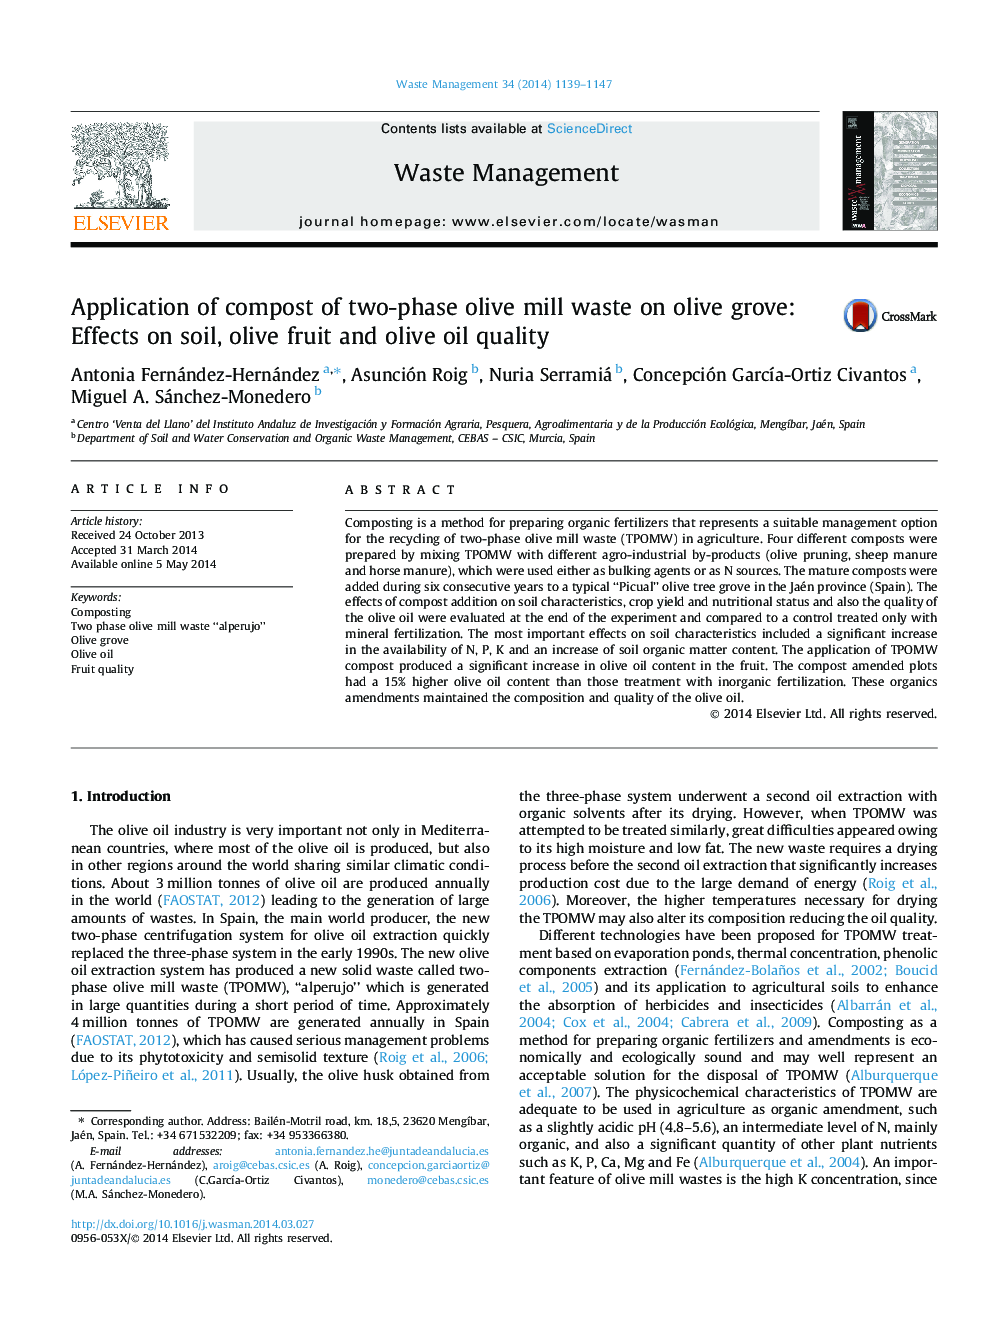 Application of compost of two-phase olive mill waste on olive grove: Effects on soil, olive fruit and olive oil quality